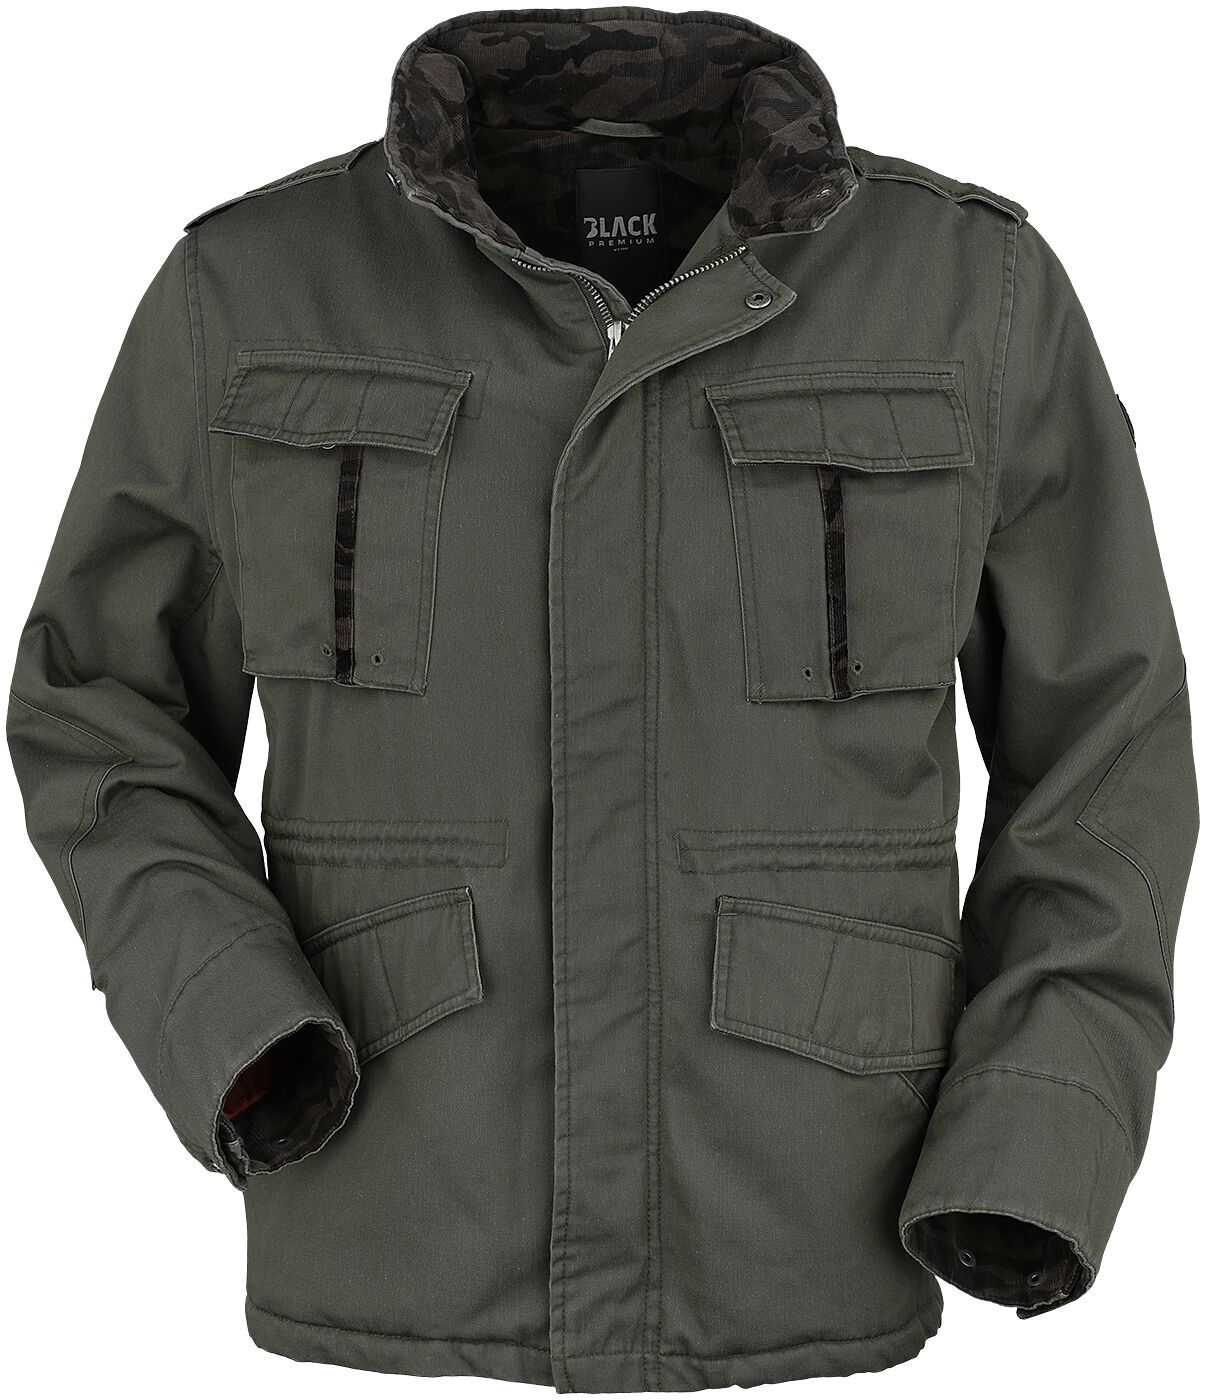 Image of Giacca invernale di Black Premium by EMP - Jacket with hidden hood - S a XXL - Uomo - verde oliva/verde oliva mimetico